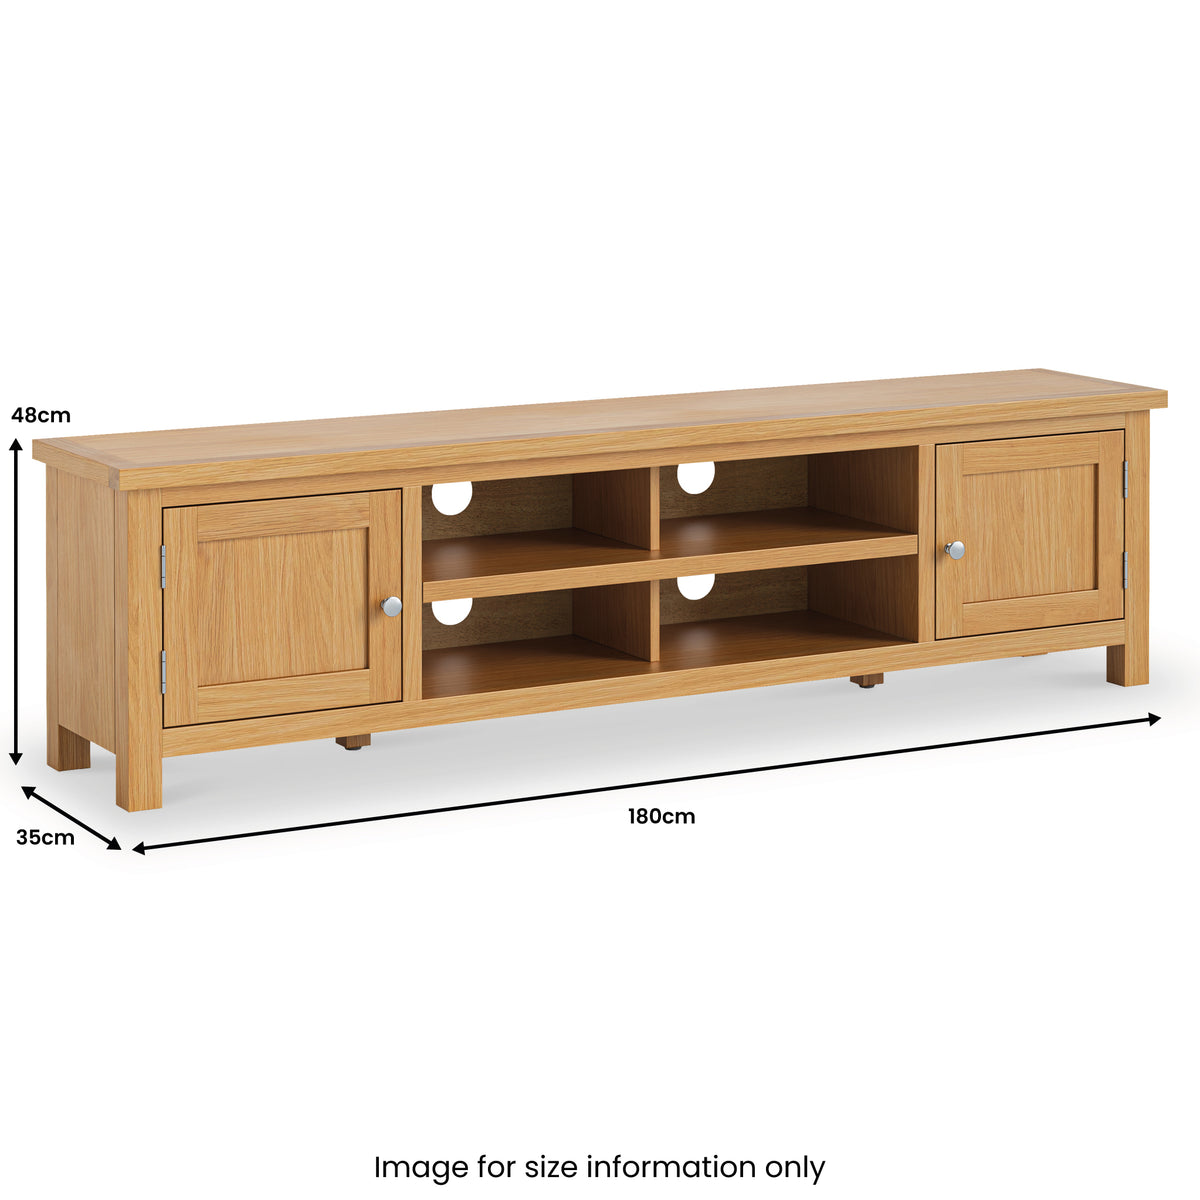 London Oak 180cm Extra Wide TV Stand dimensions